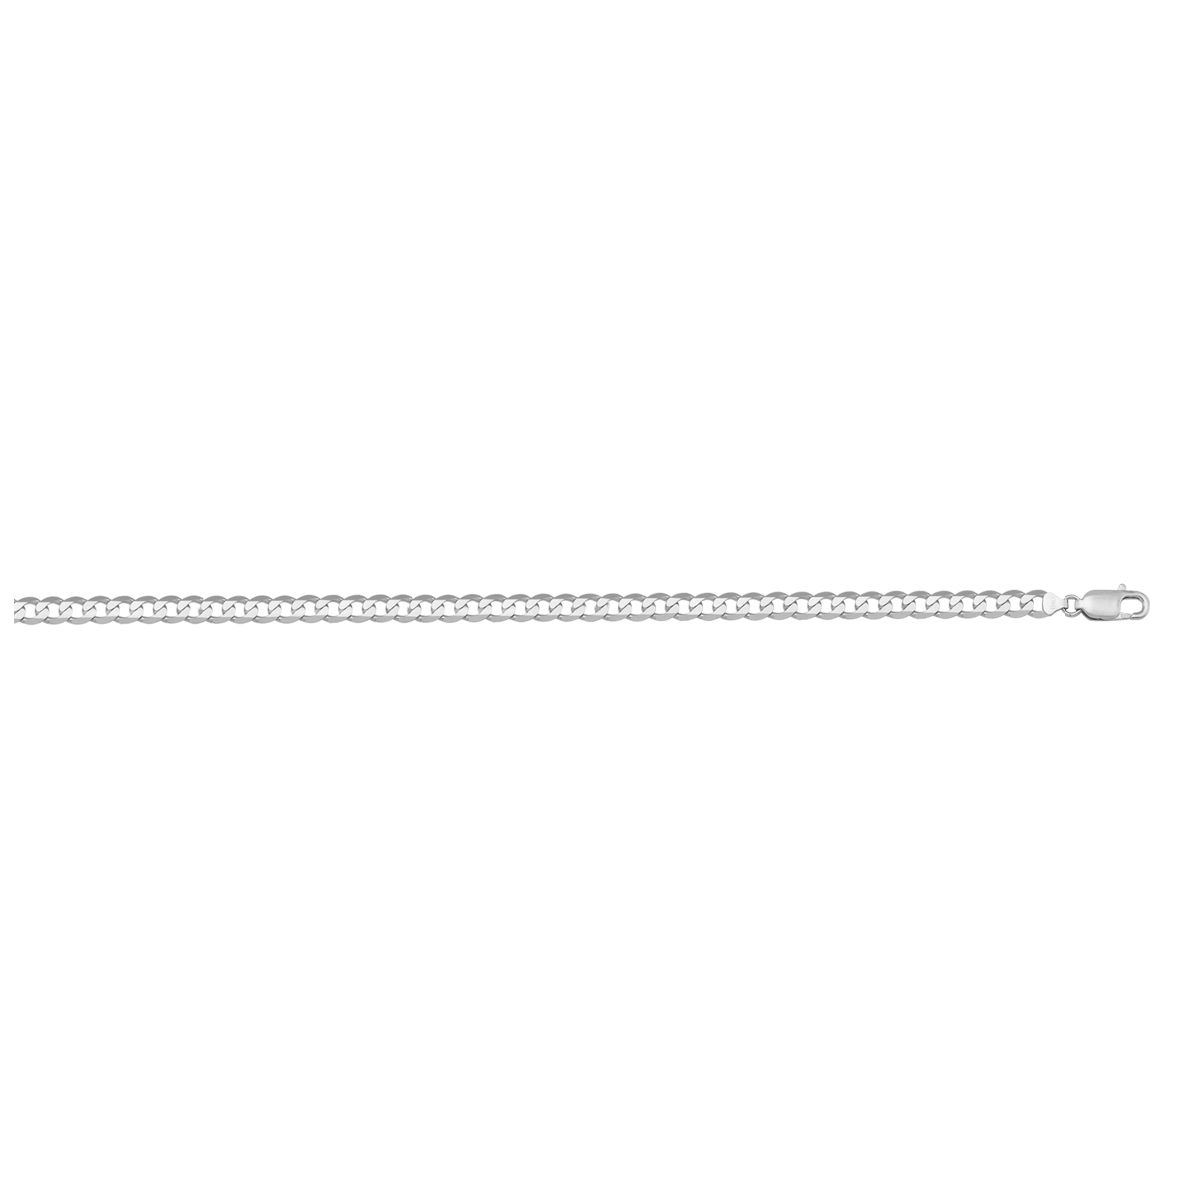 CCRB04, Gold Bracelet, Open Curb, White Gold